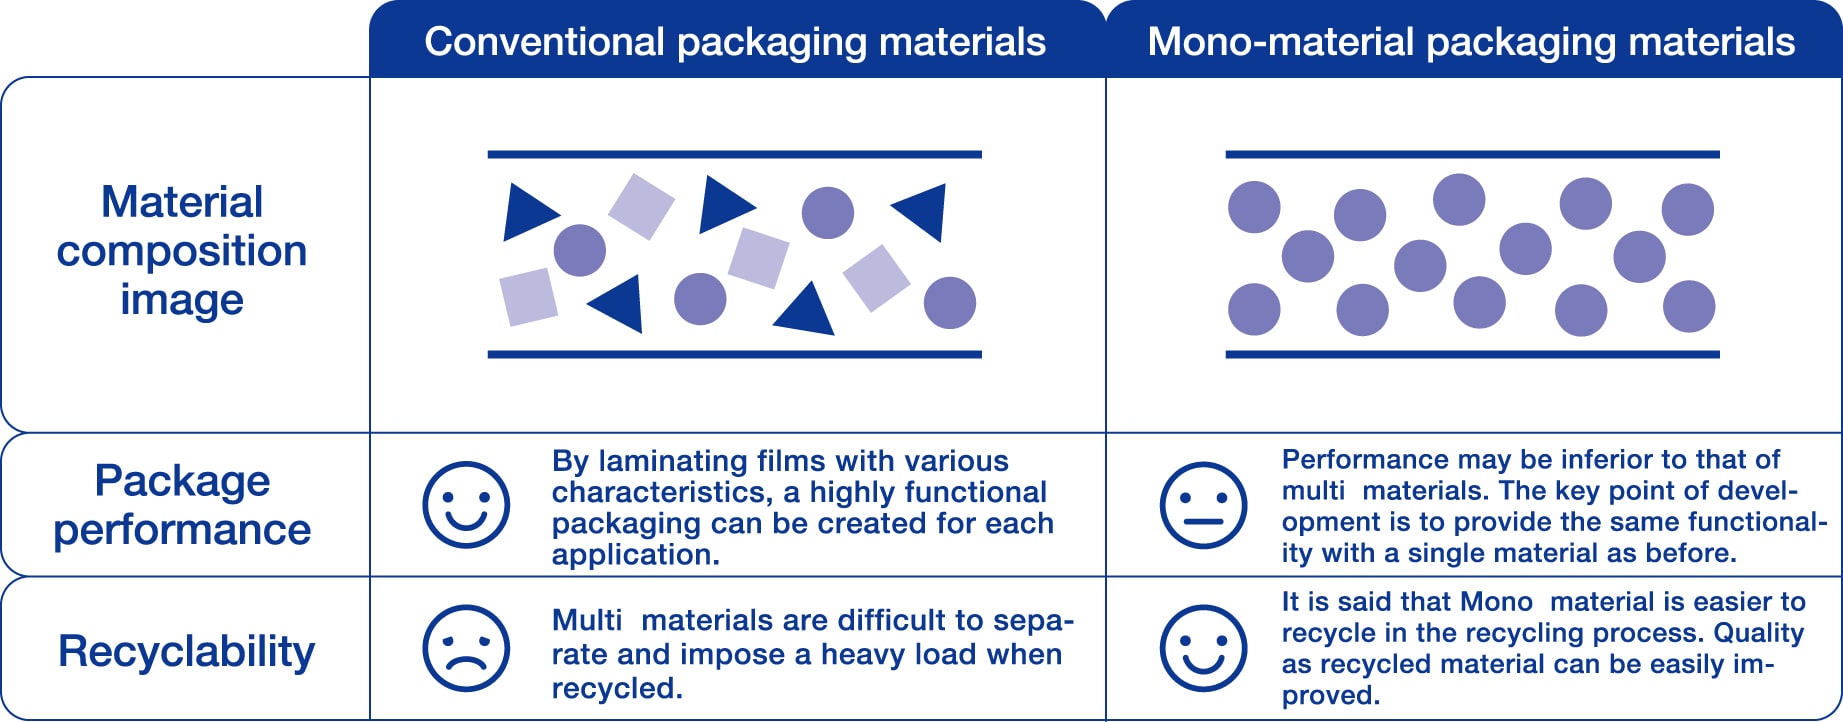 What is mono-material?